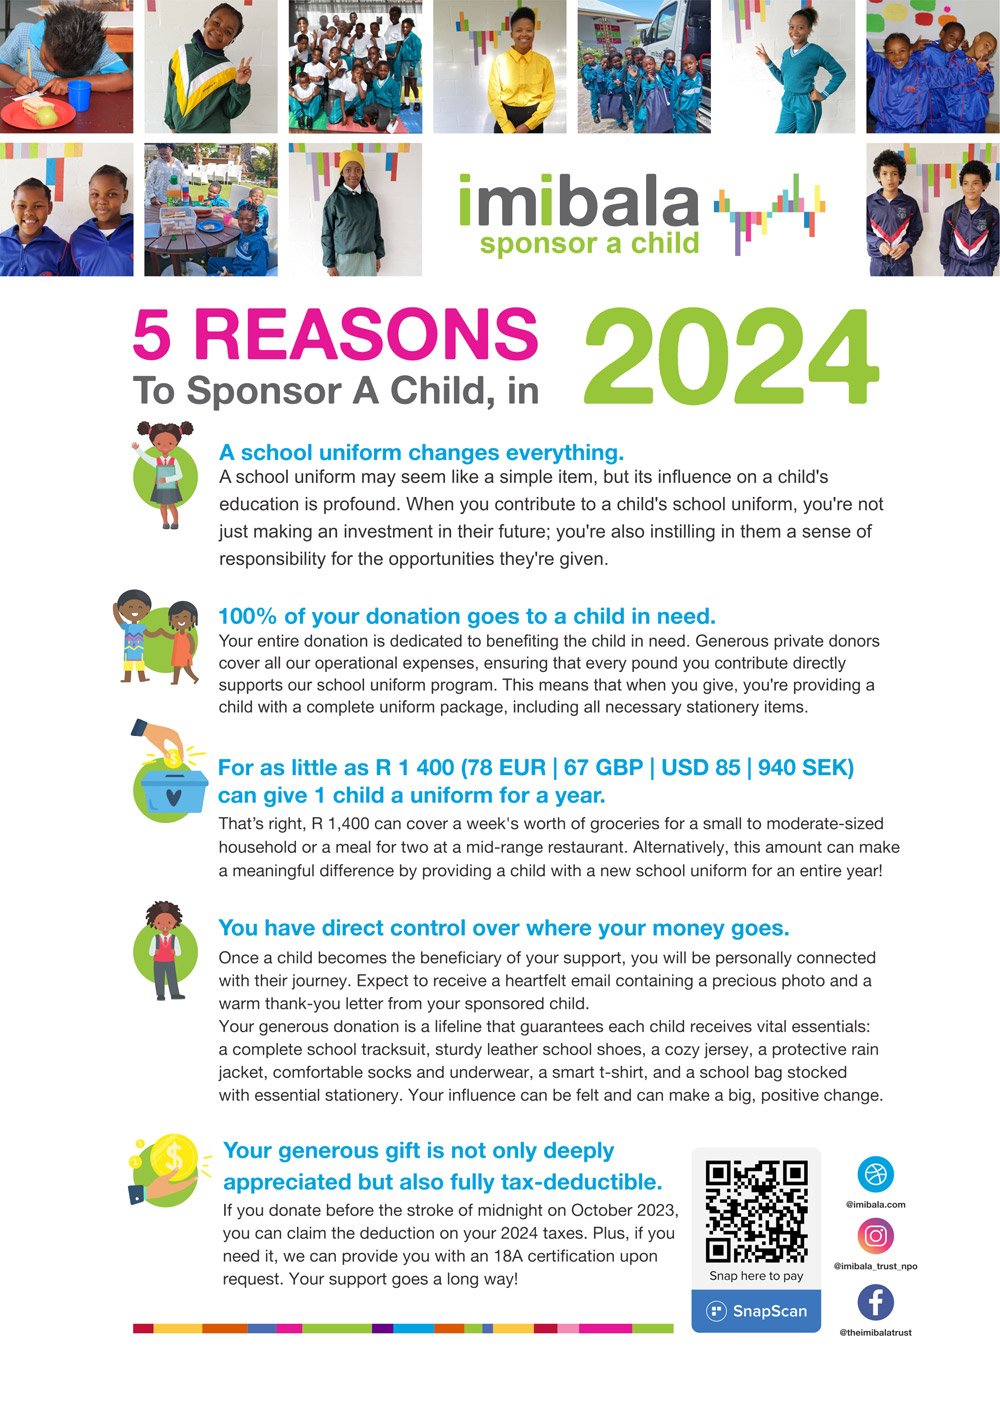 5 reasons to sponsor a child